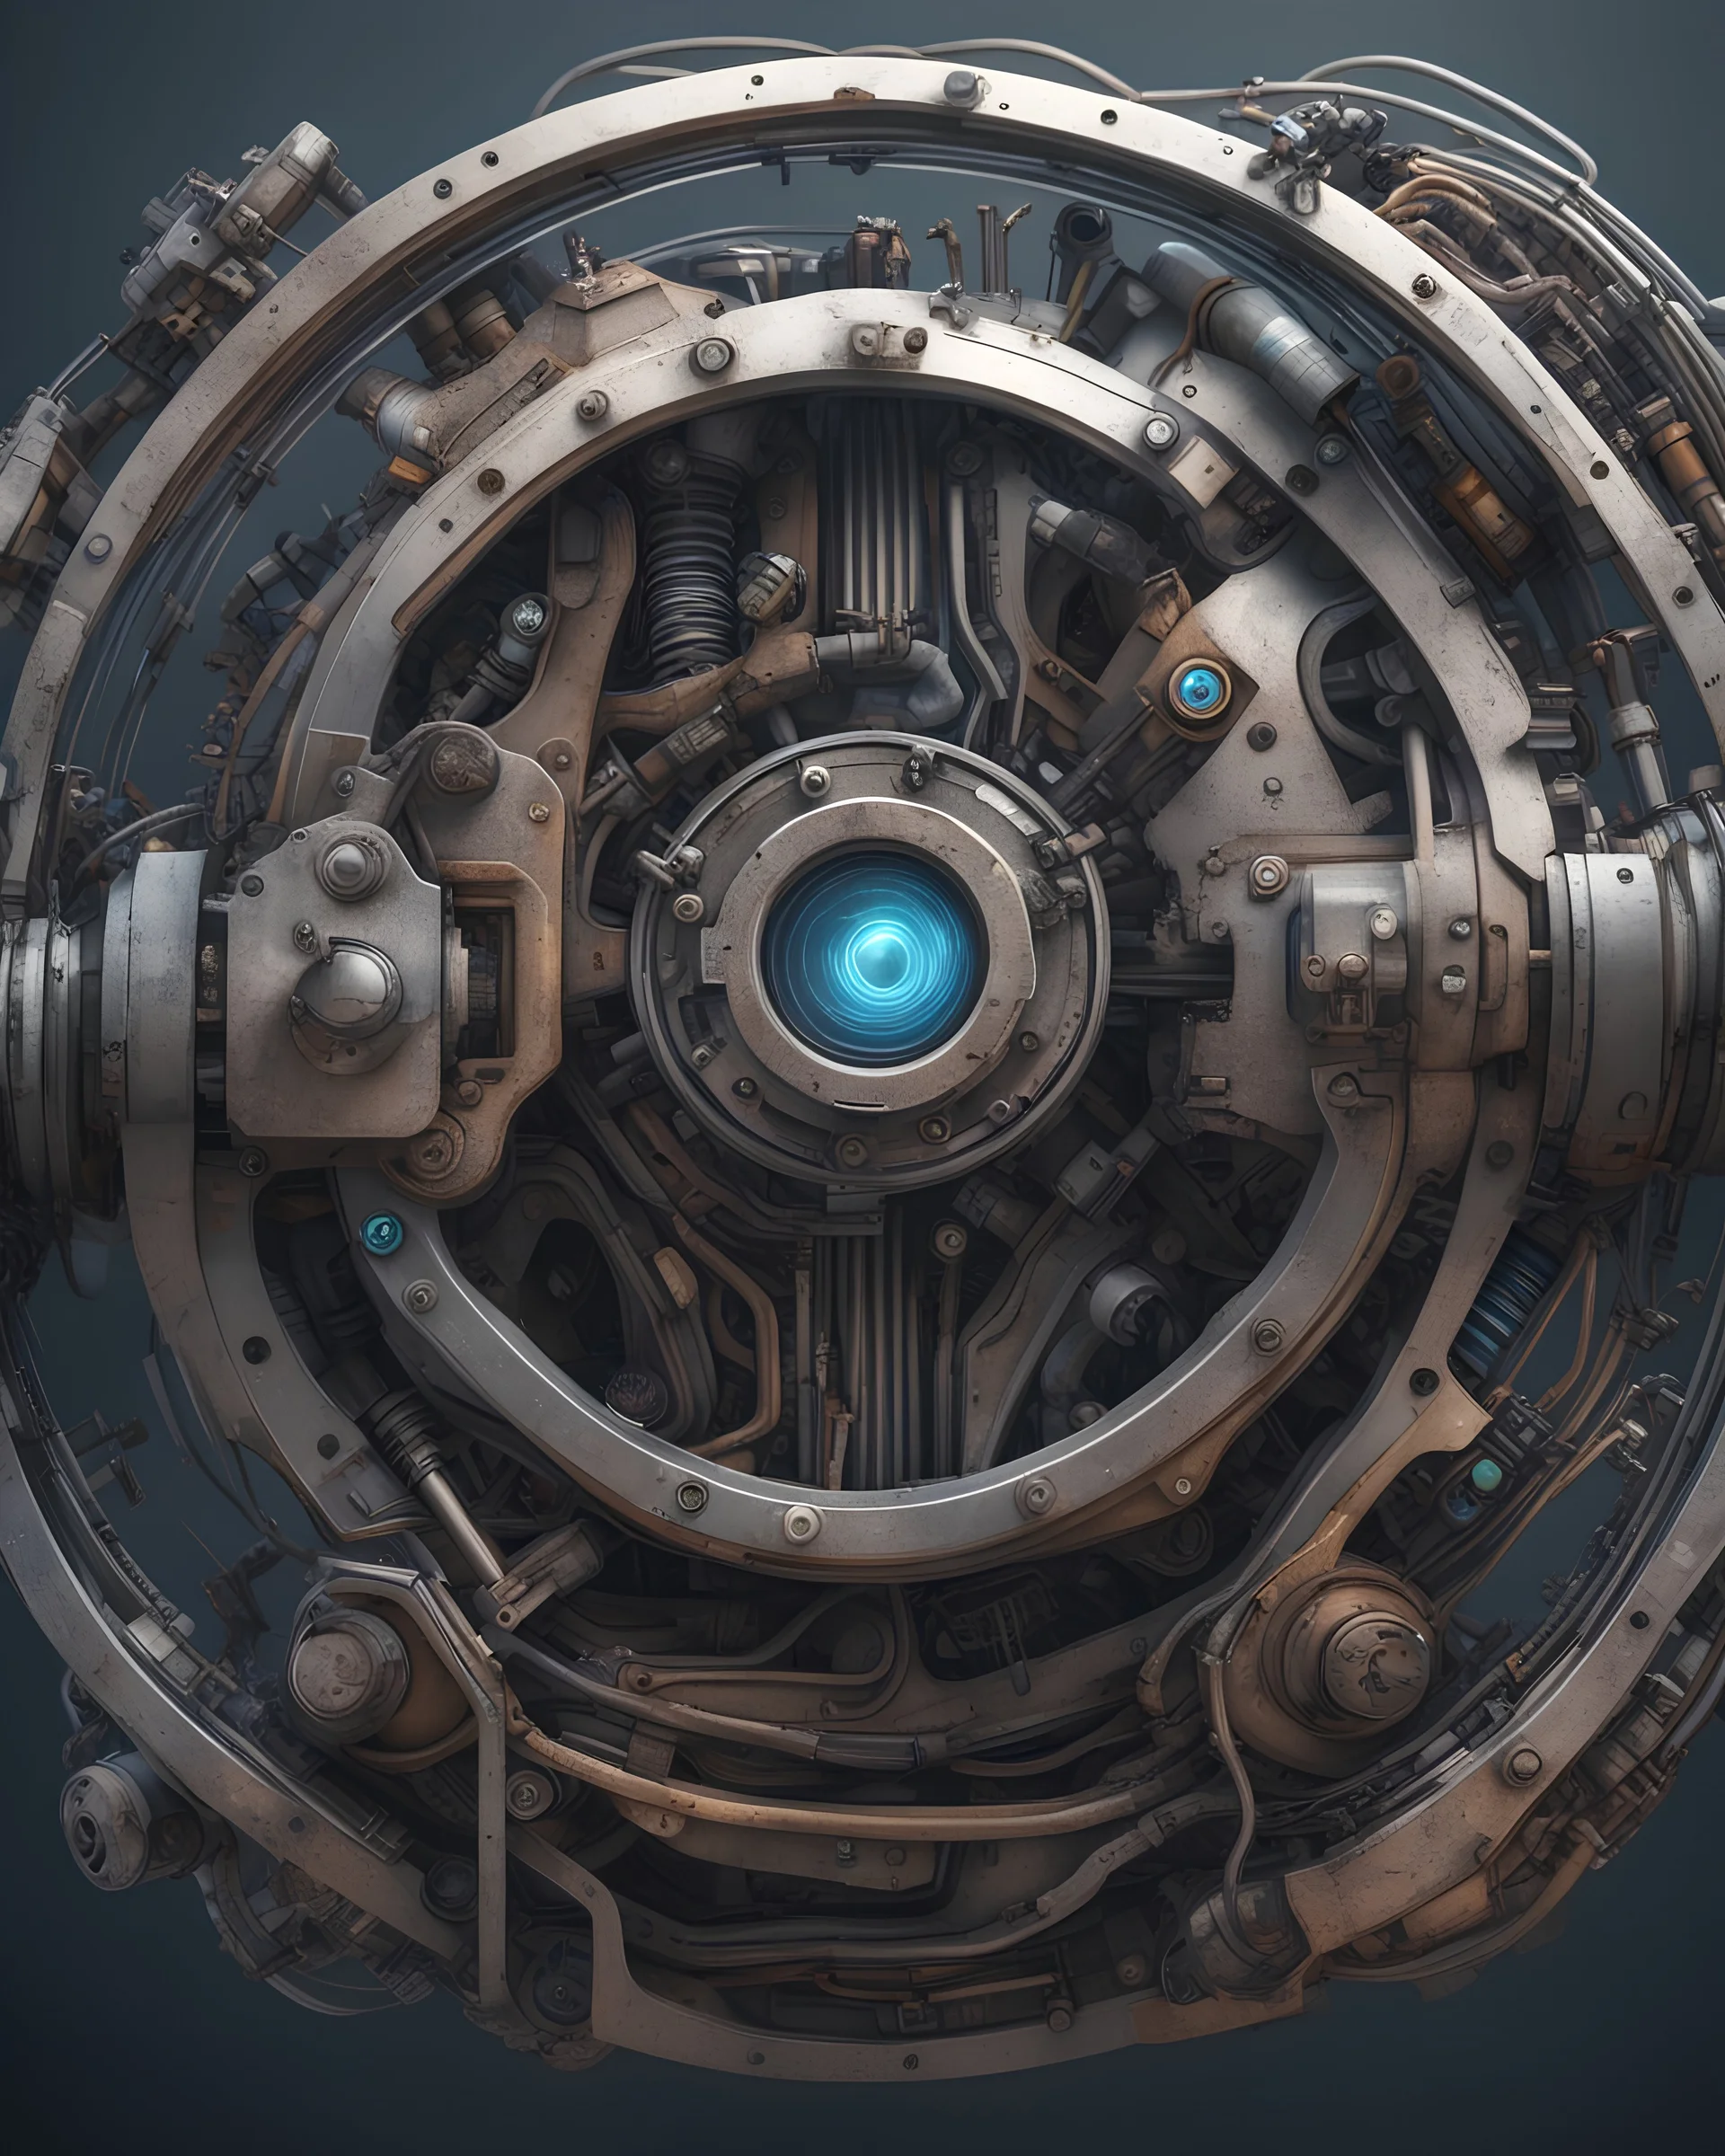 Futuristic logo mechanical design made with engine parts and wires dysoptia cyberage HAWKEN postapocalyptic dysoptia scene photorealistic uhd 8k VRAY highly detailed HDR